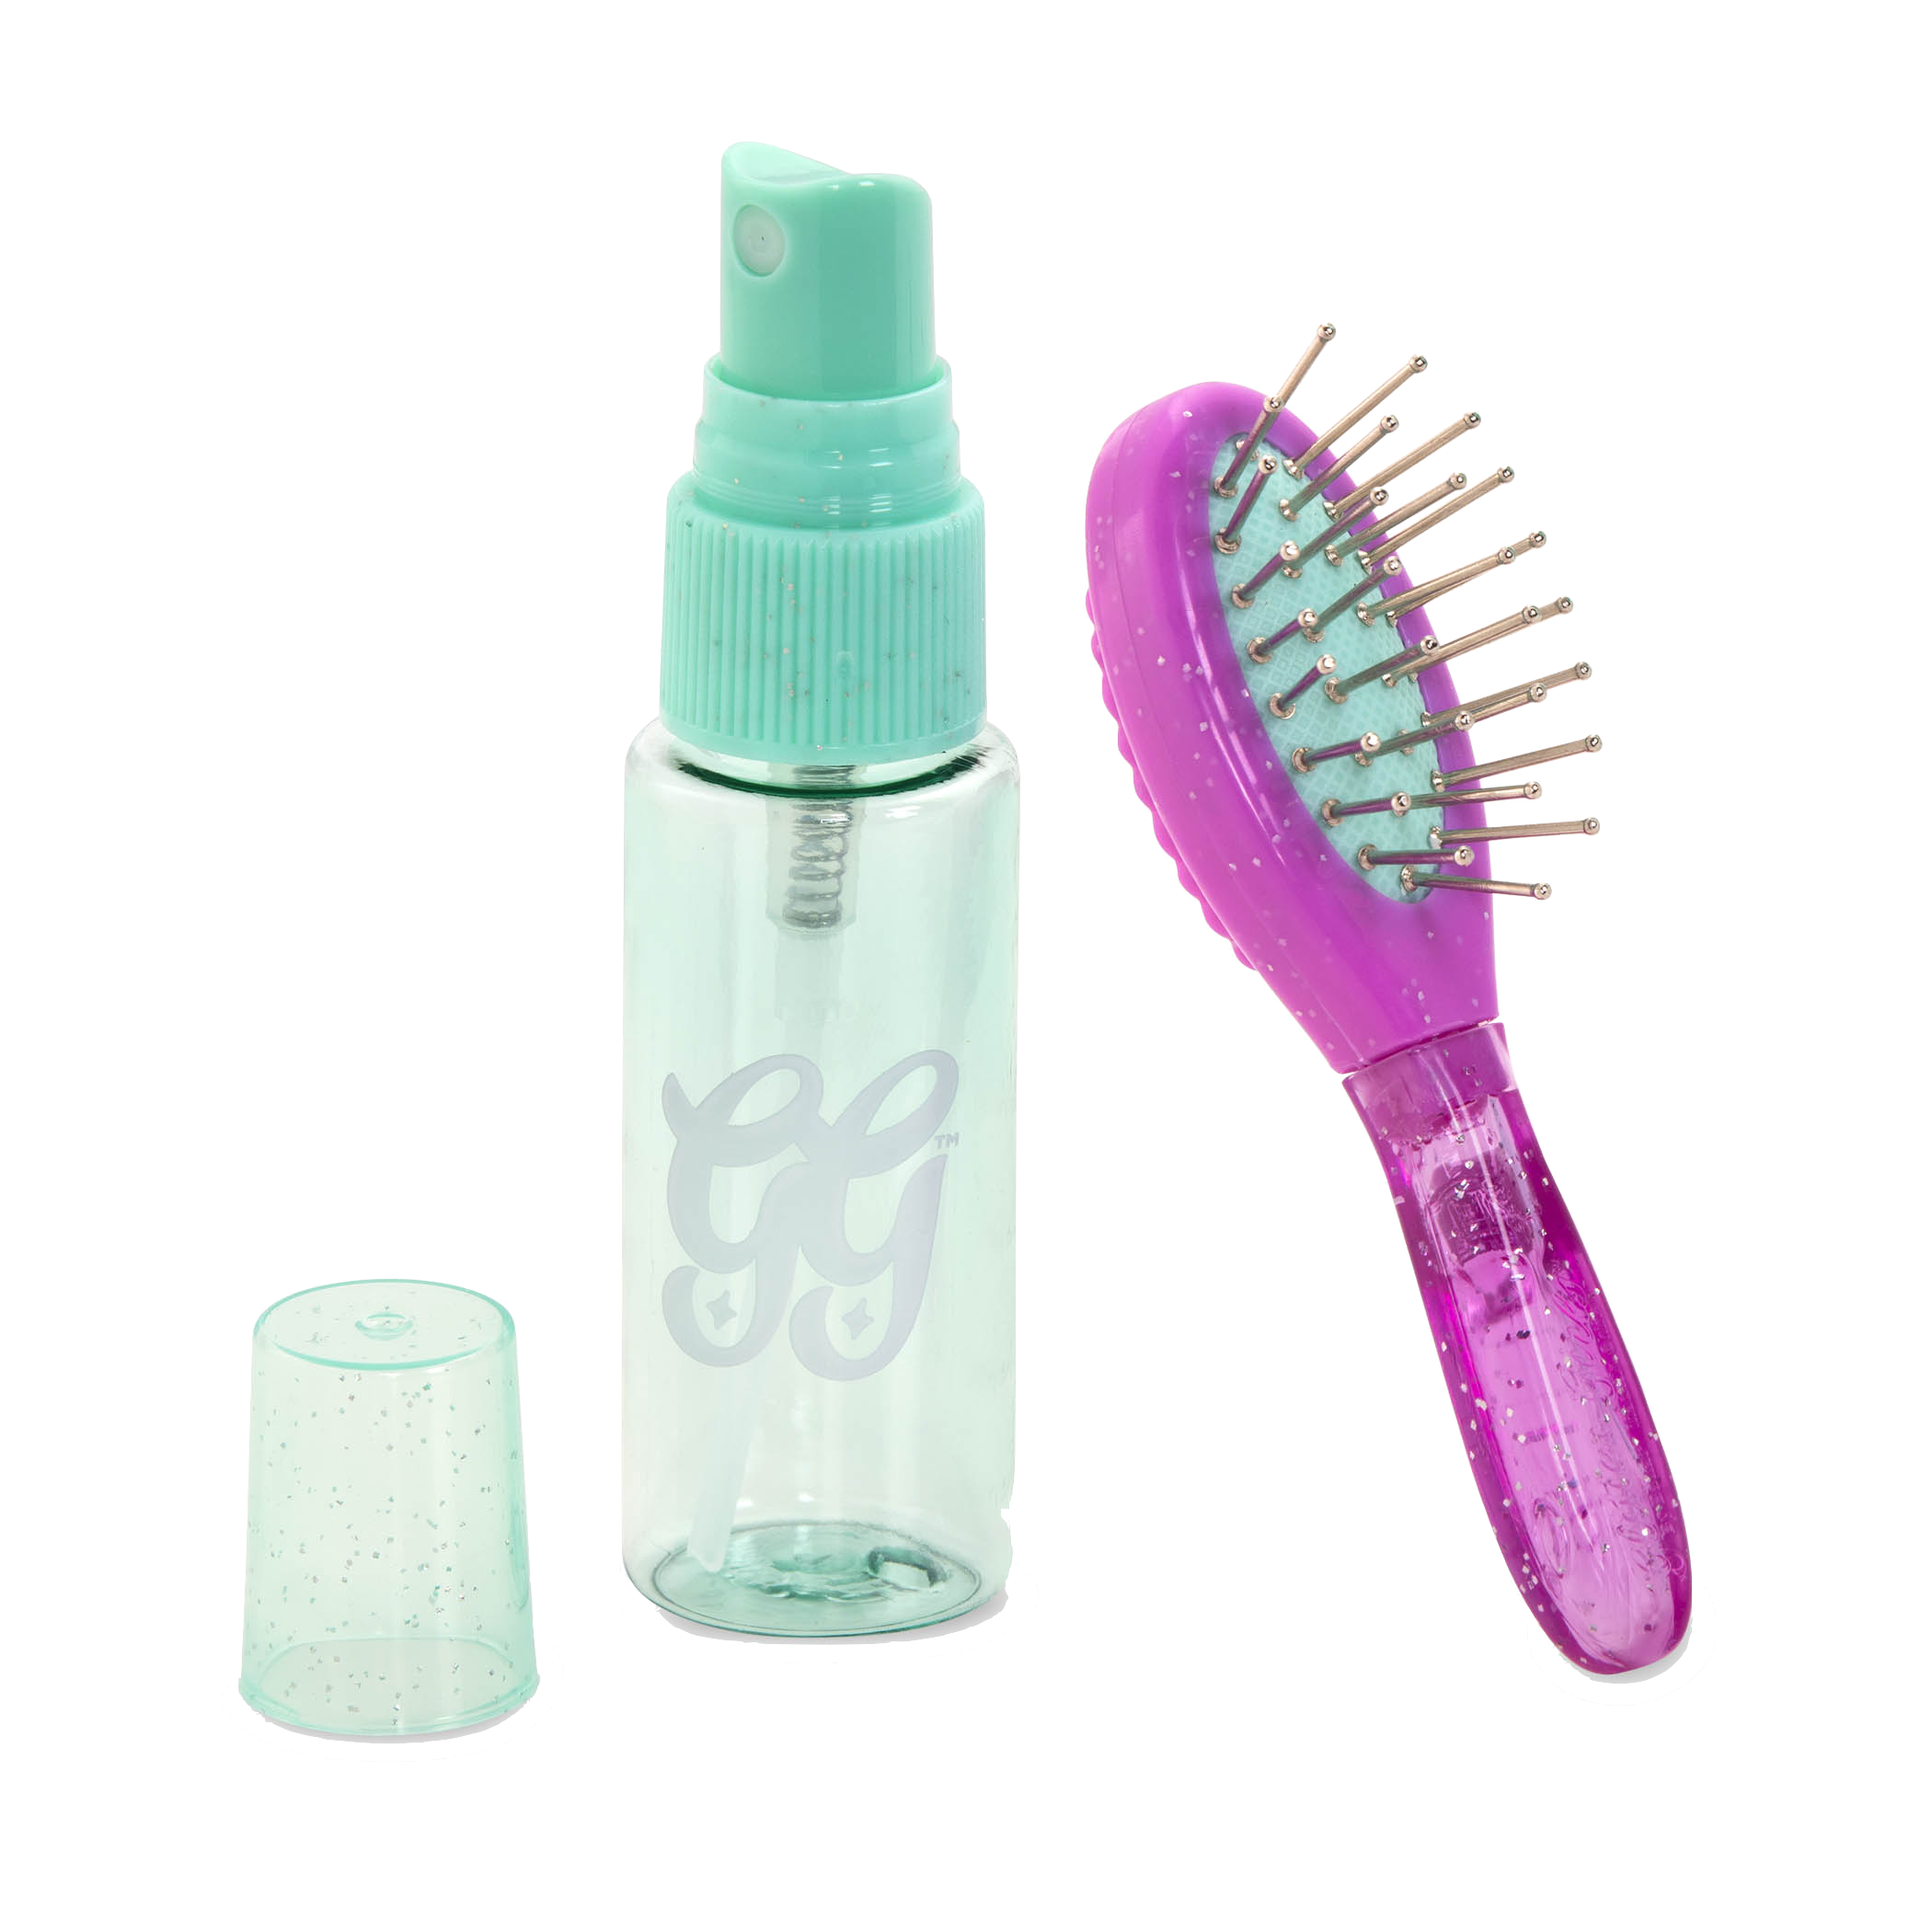 Bedazzling Brush And Spray Bottle!